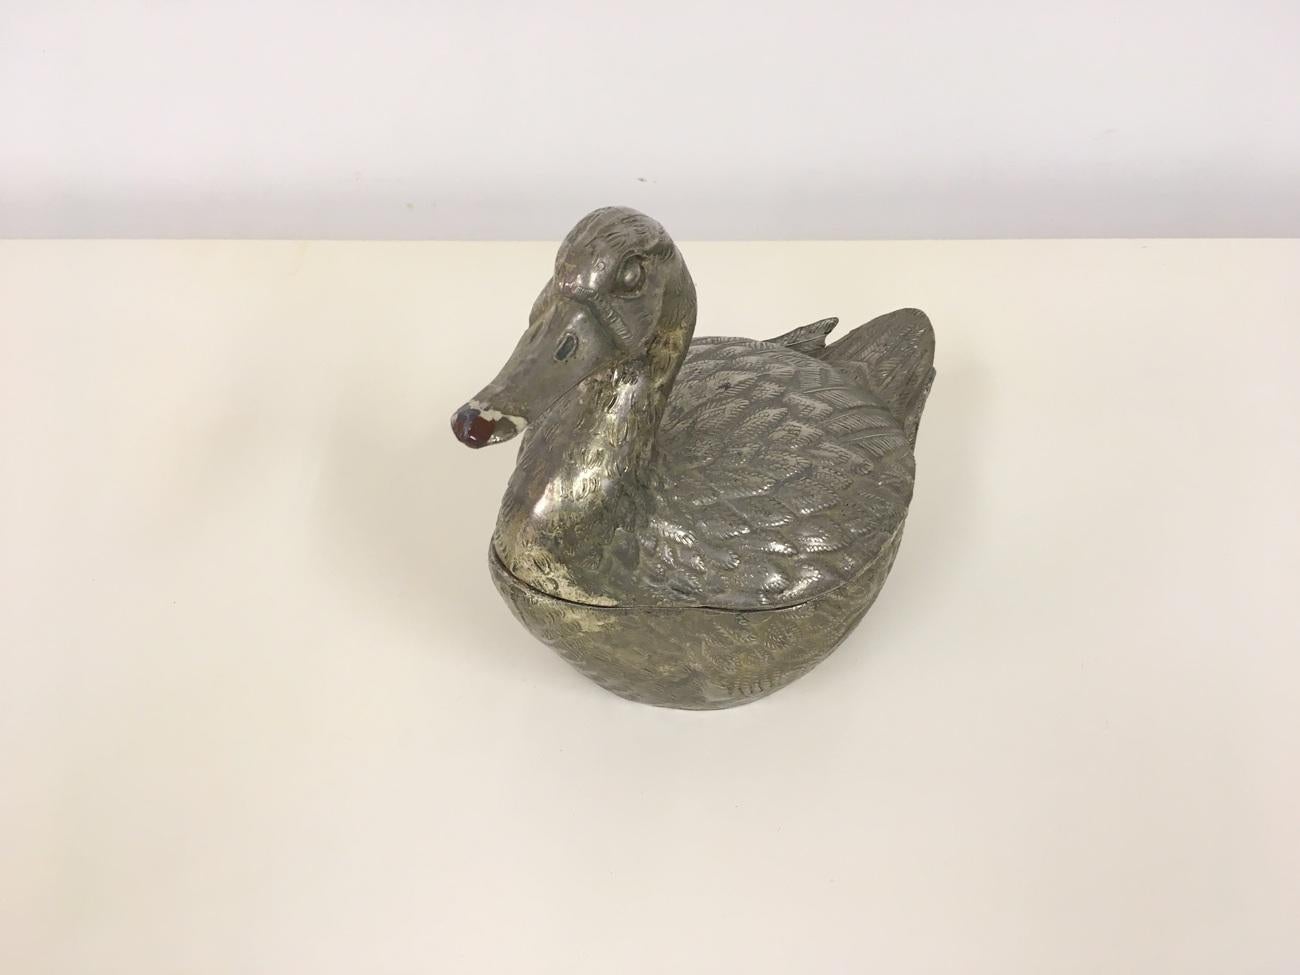 Duck ice bucket 
By Mauro Manetti
Silvered metal
Italy 1970s
This one with some wear to the nose/beak.